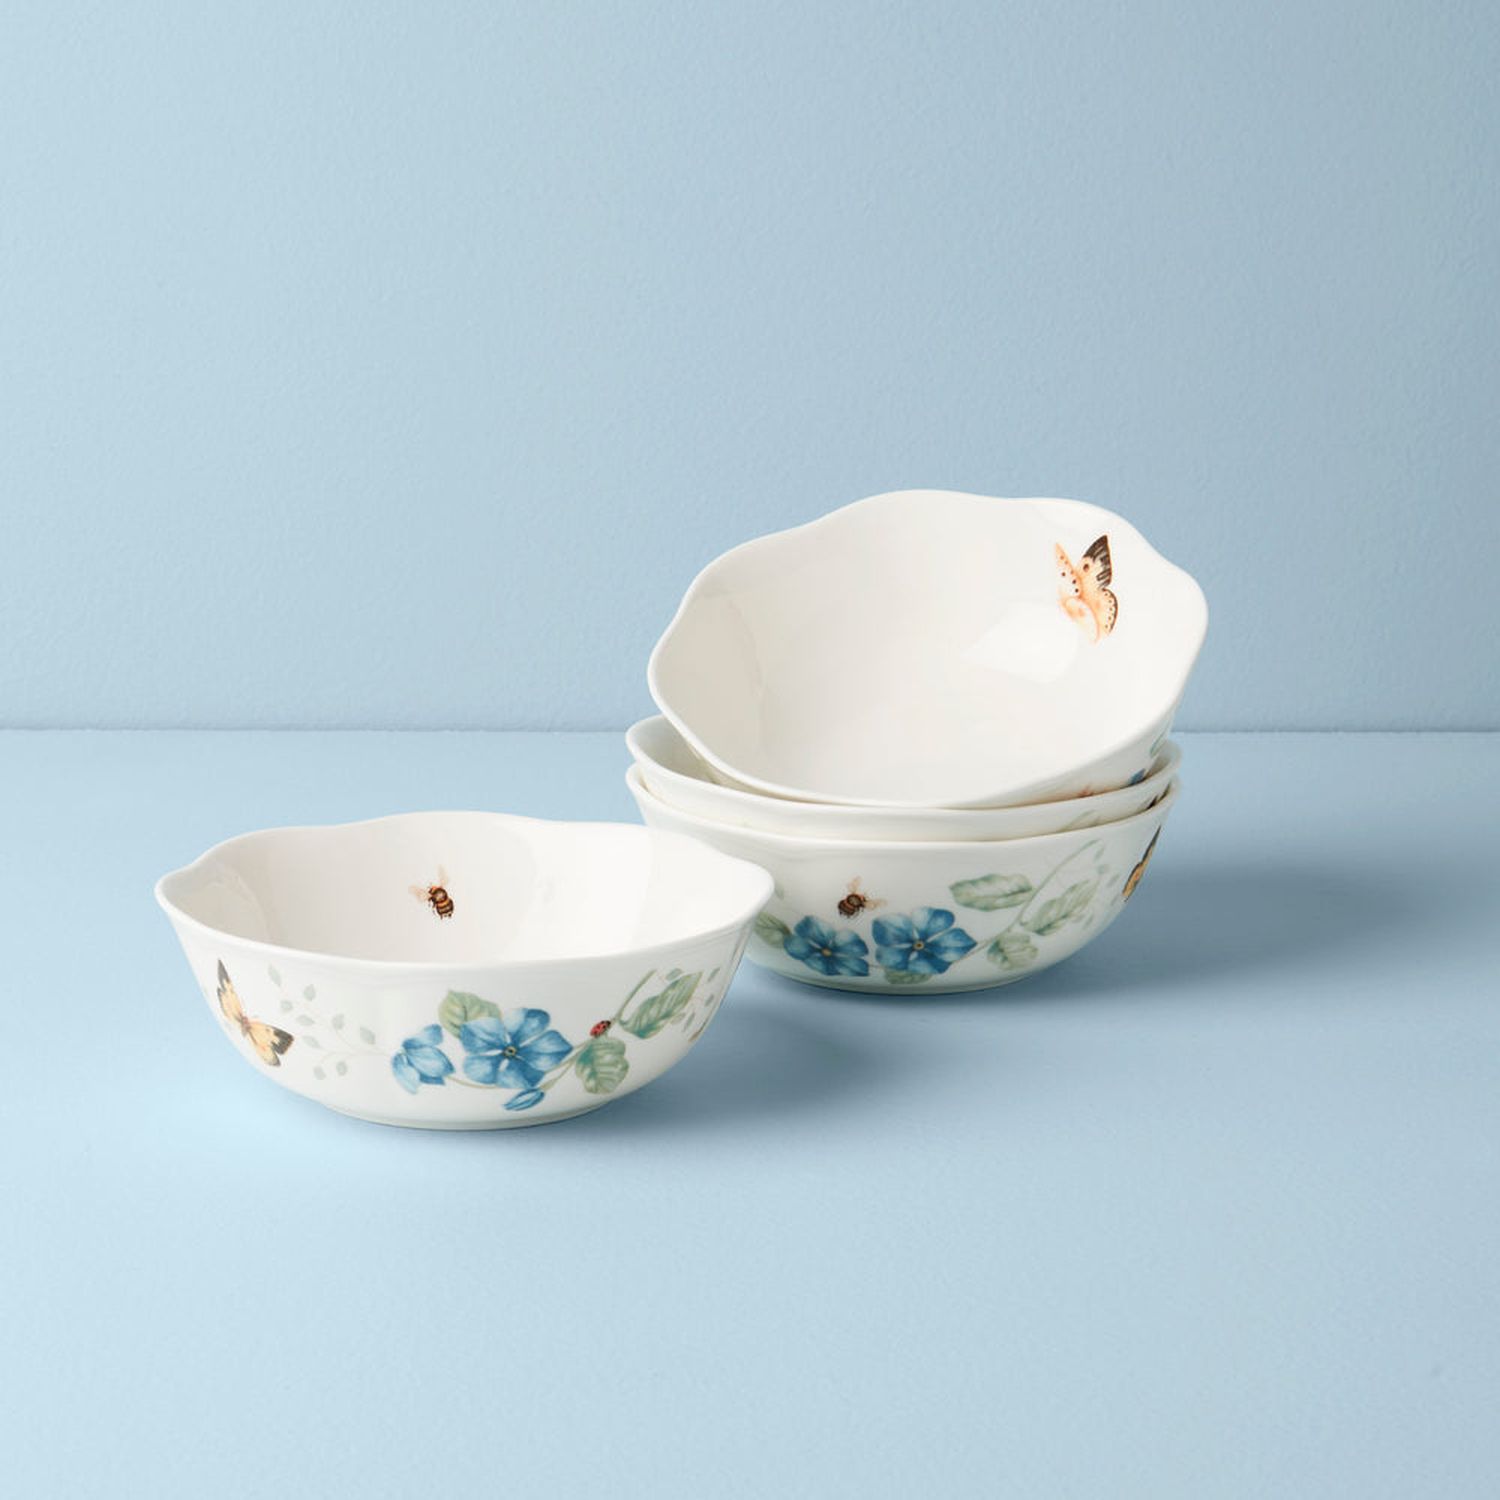 Lenox Butterfly Meadow Serve and Store Bowl